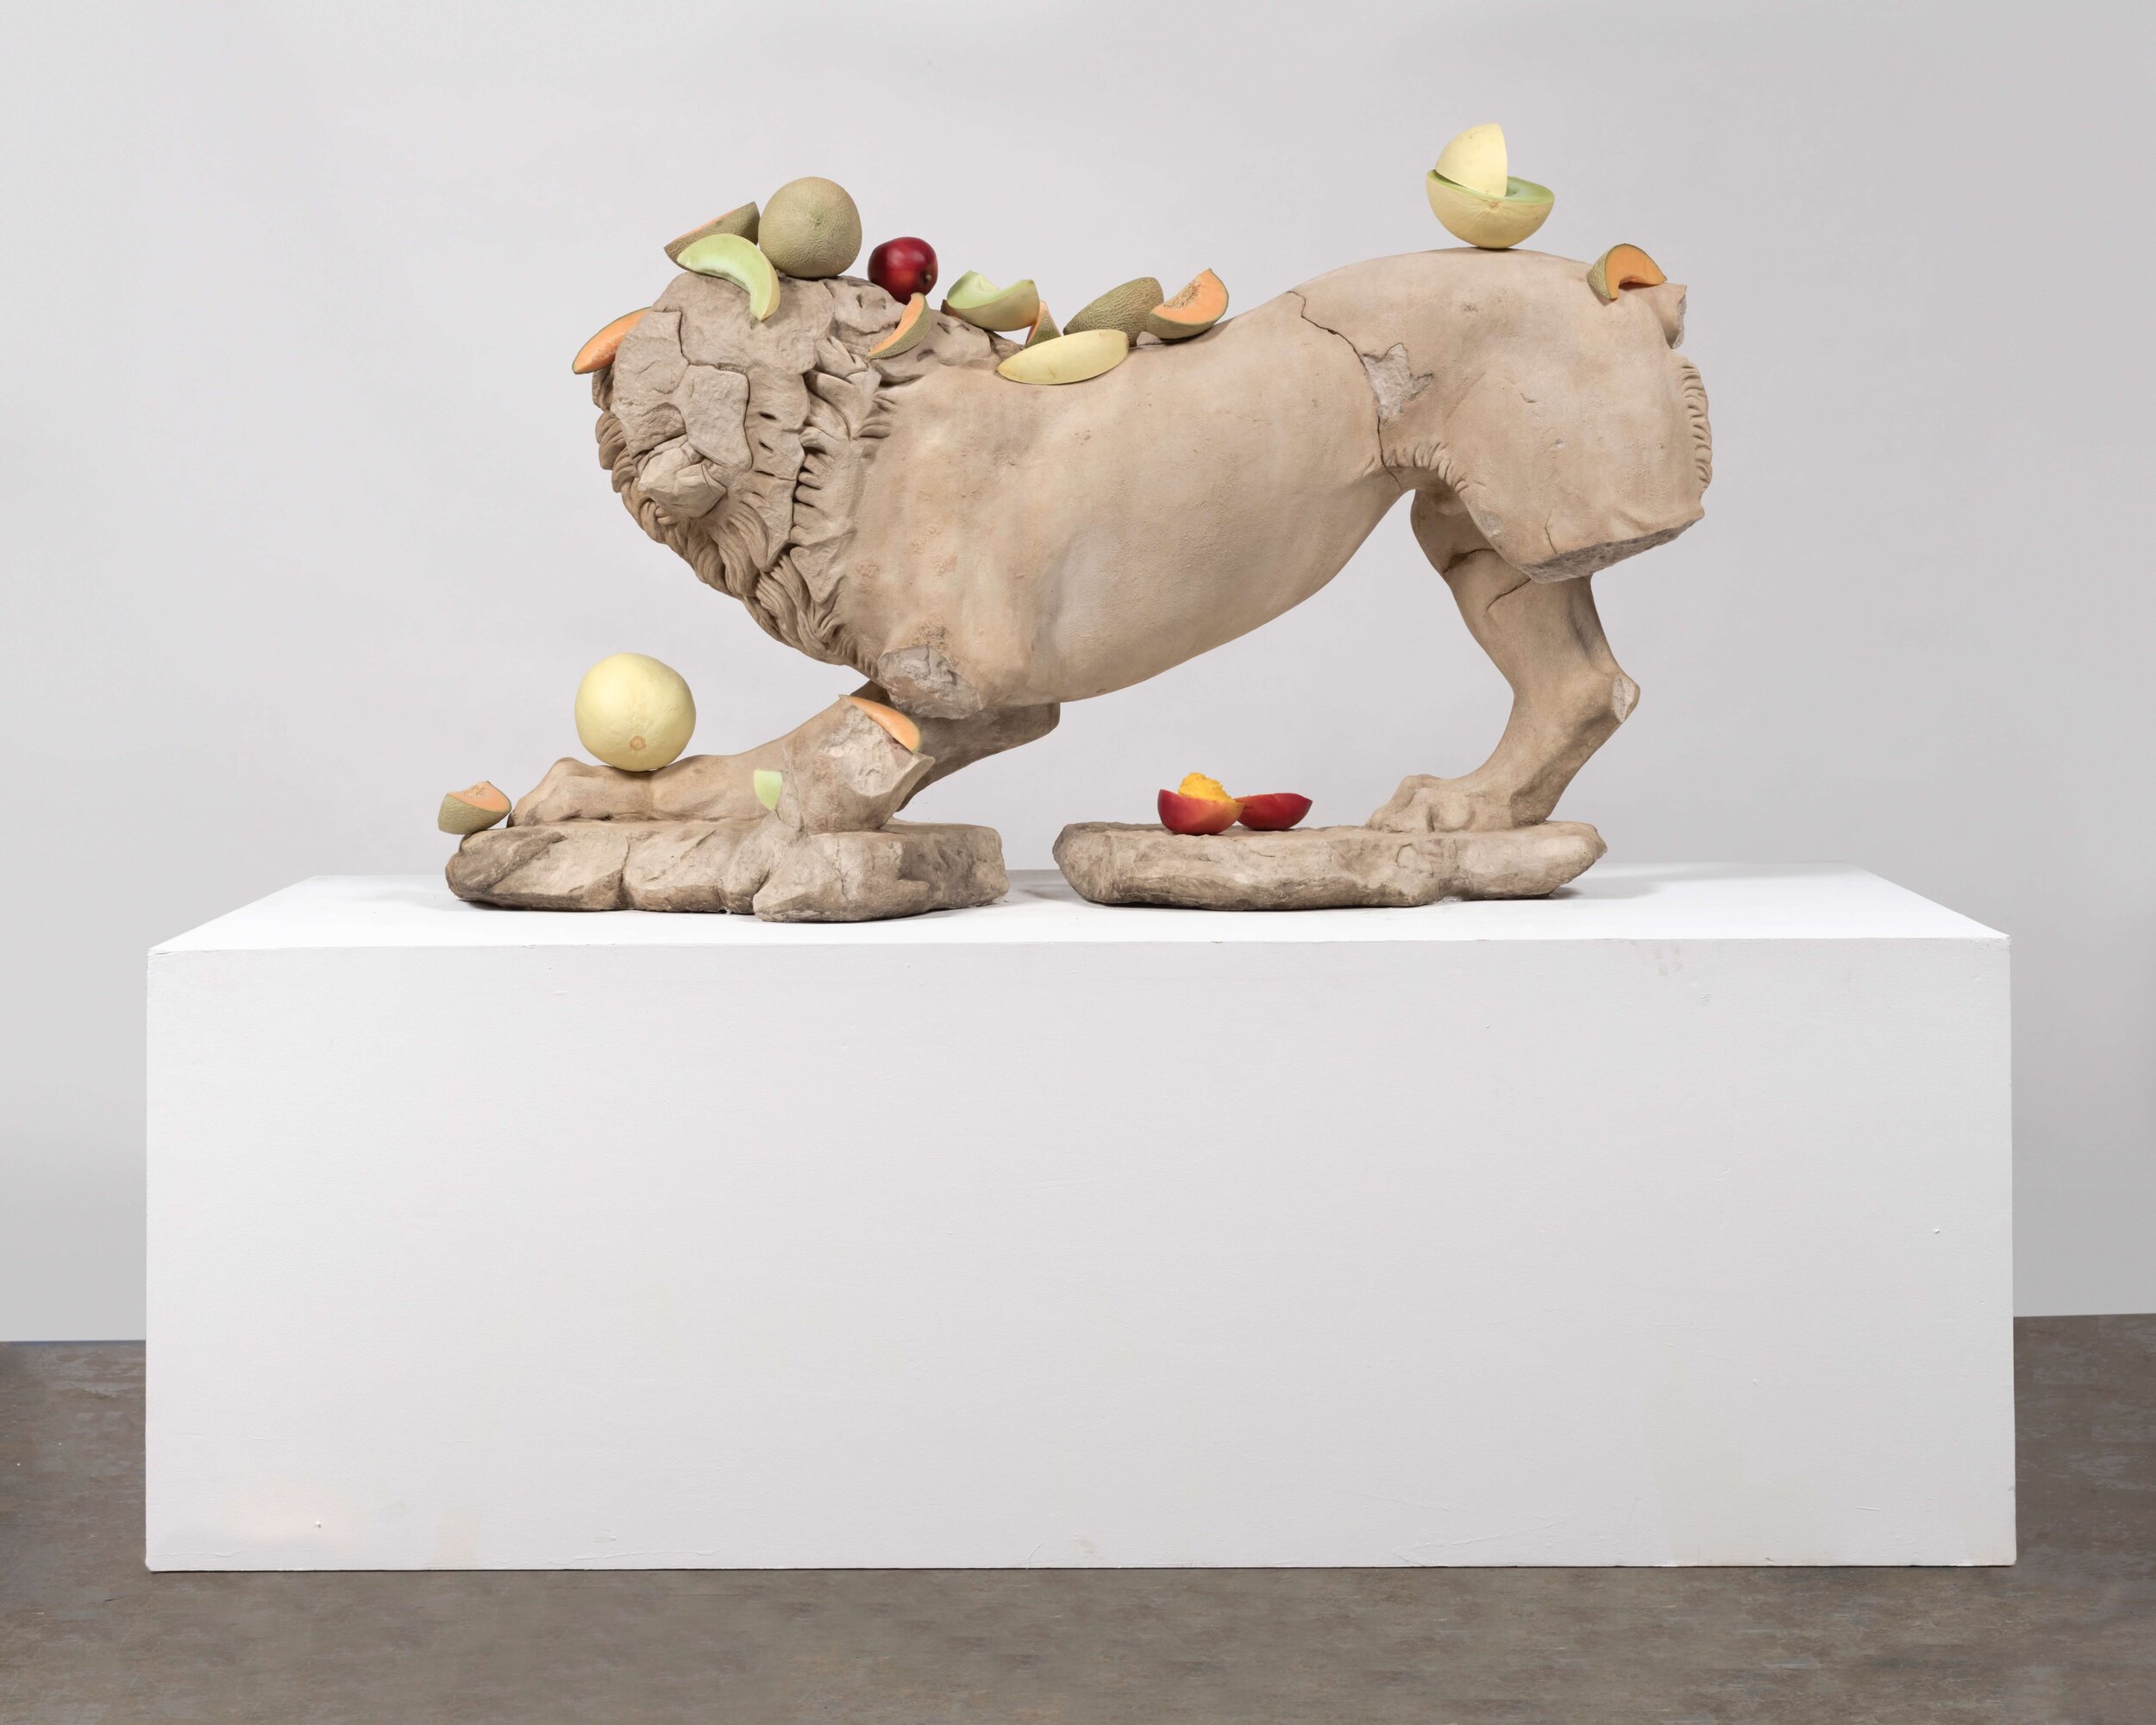 Matelli, Lion (fruit) (View 1), 2019, glass fiber reinforced concrete, marble dust, mineral pigments, stainless steel, cast urethane, paint, 33 x 61 x 16 in., 83.8 x 155 x 40.6 cm, CNON 61.402_Lance Brewer.jpg